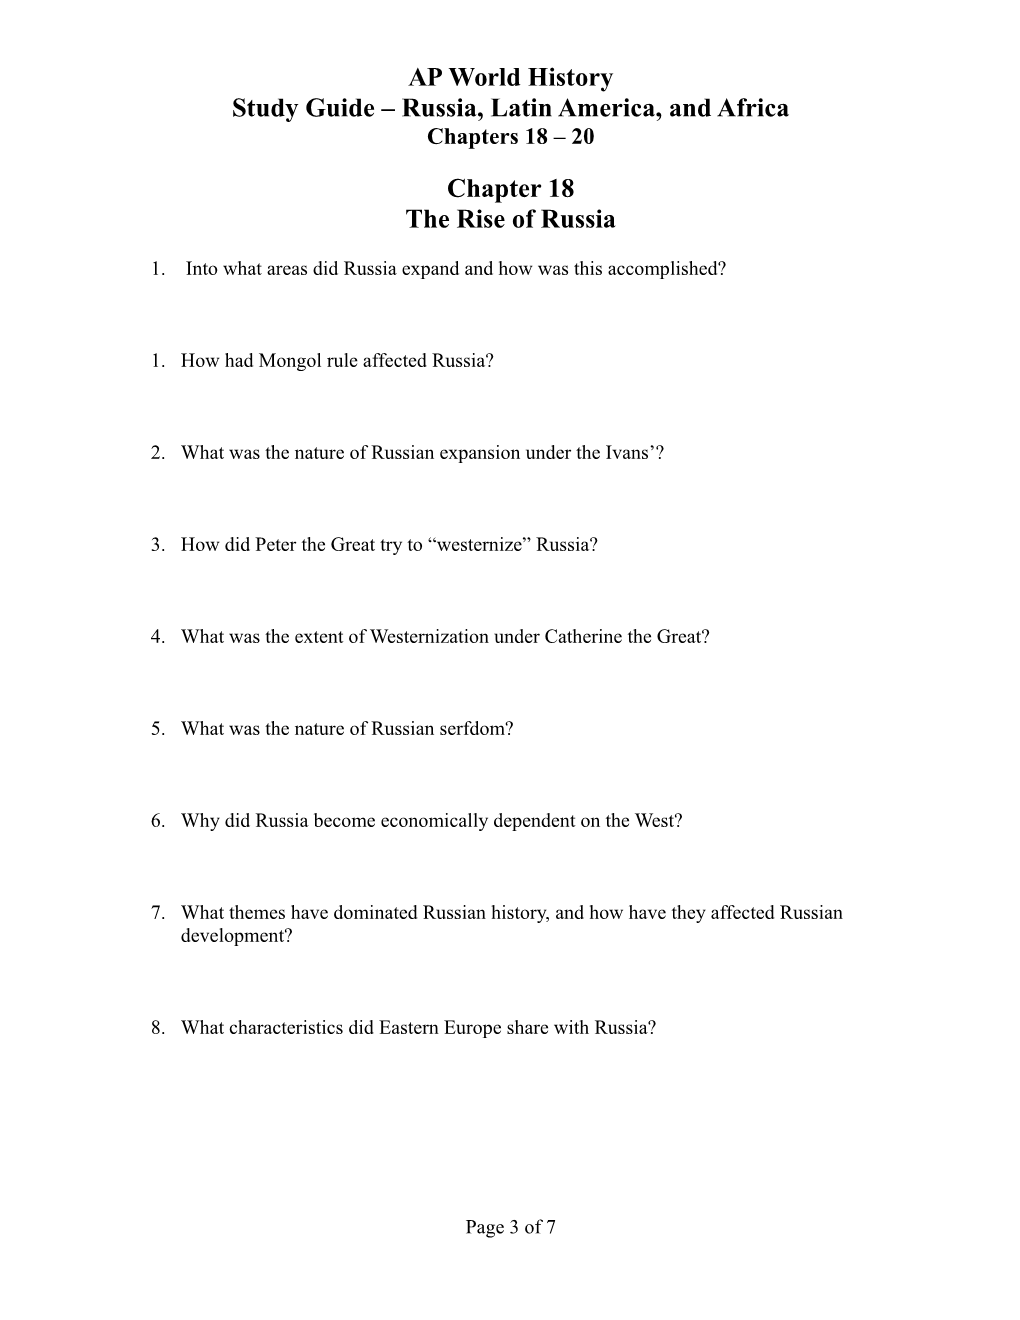 These Questions Are Based on Class Discussions and Material, Reading from Chapters 1-7